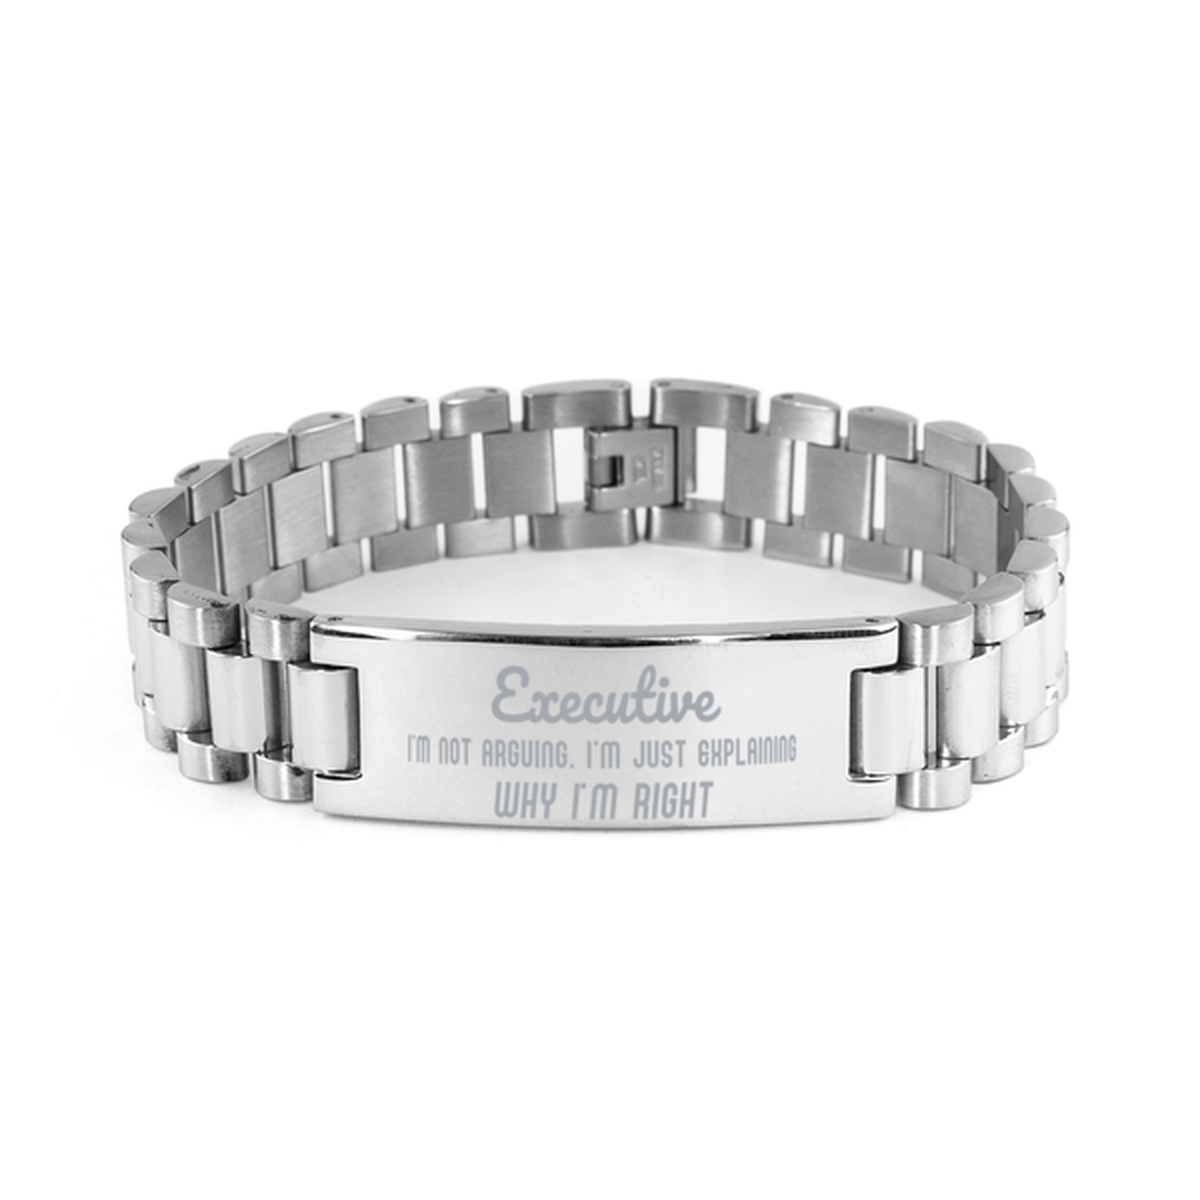 Executive I'm not Arguing. I'm Just Explaining Why I'm RIGHT Ladder Stainless Steel Bracelet, Graduation Birthday Christmas Executive Gifts For Executive Funny Saying Quote Present for Men Women Coworker